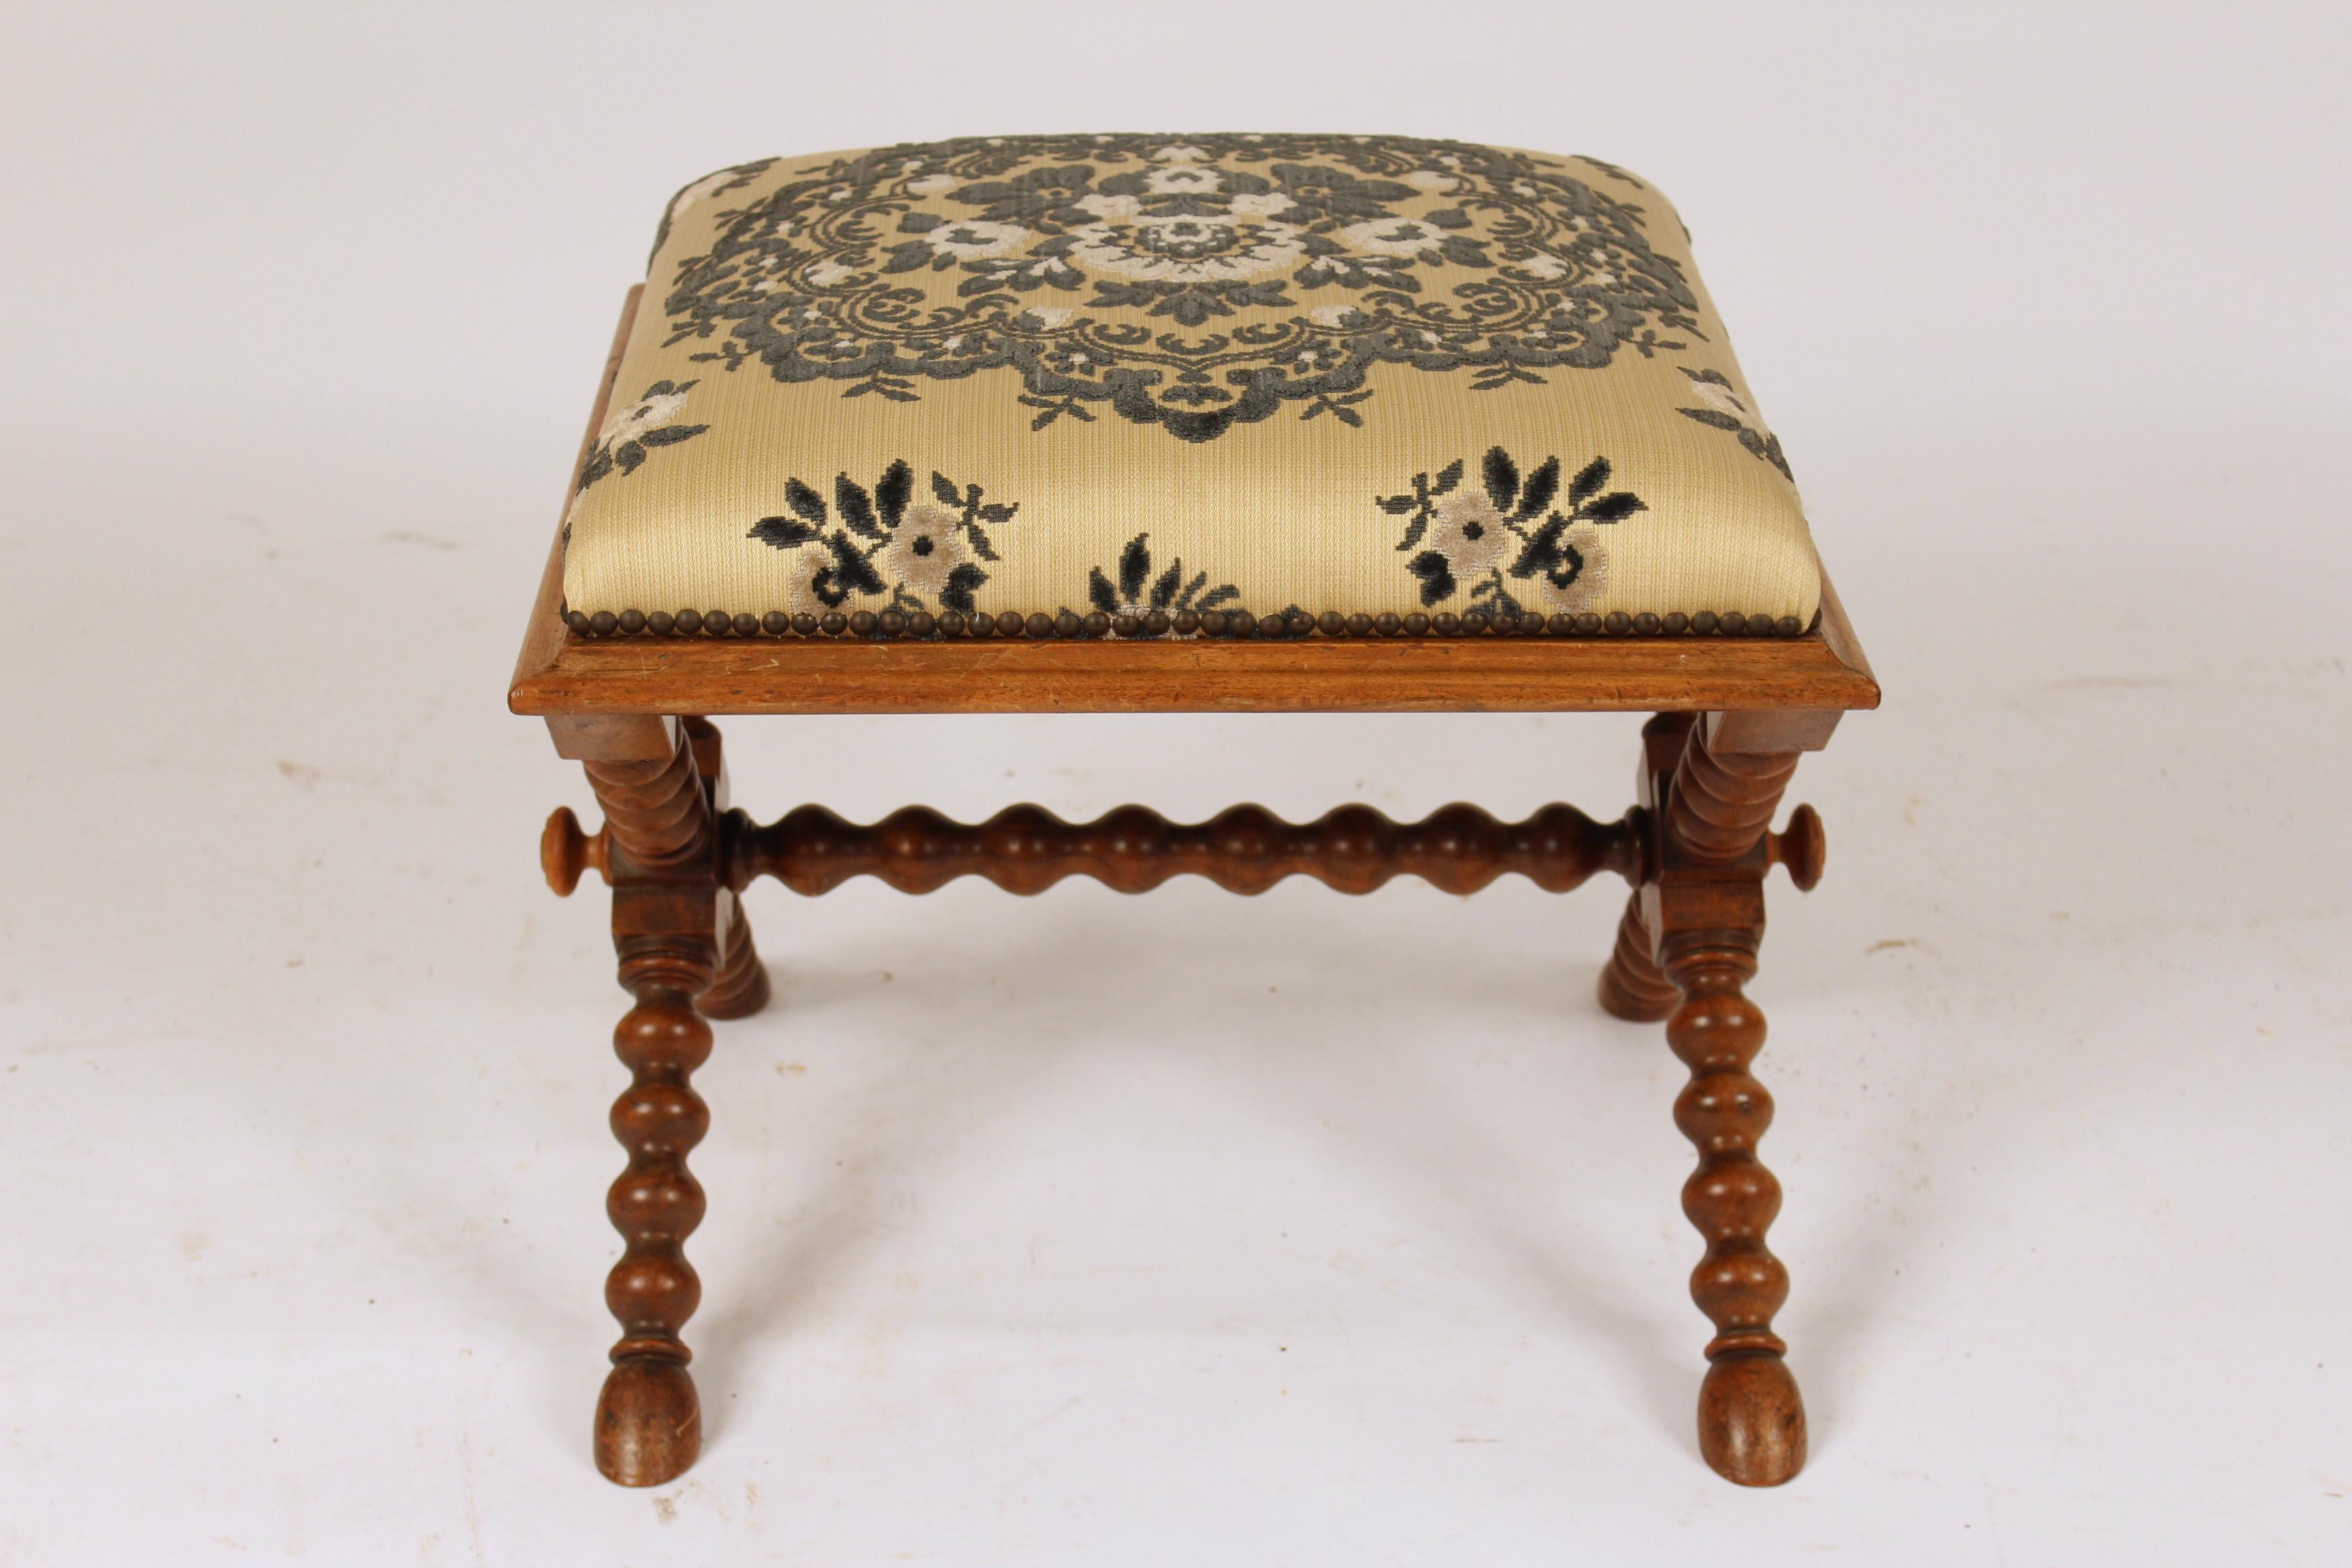 Continental Napoleon III style walnut bench, with turned legs ending in hoof feet, circa 1900.